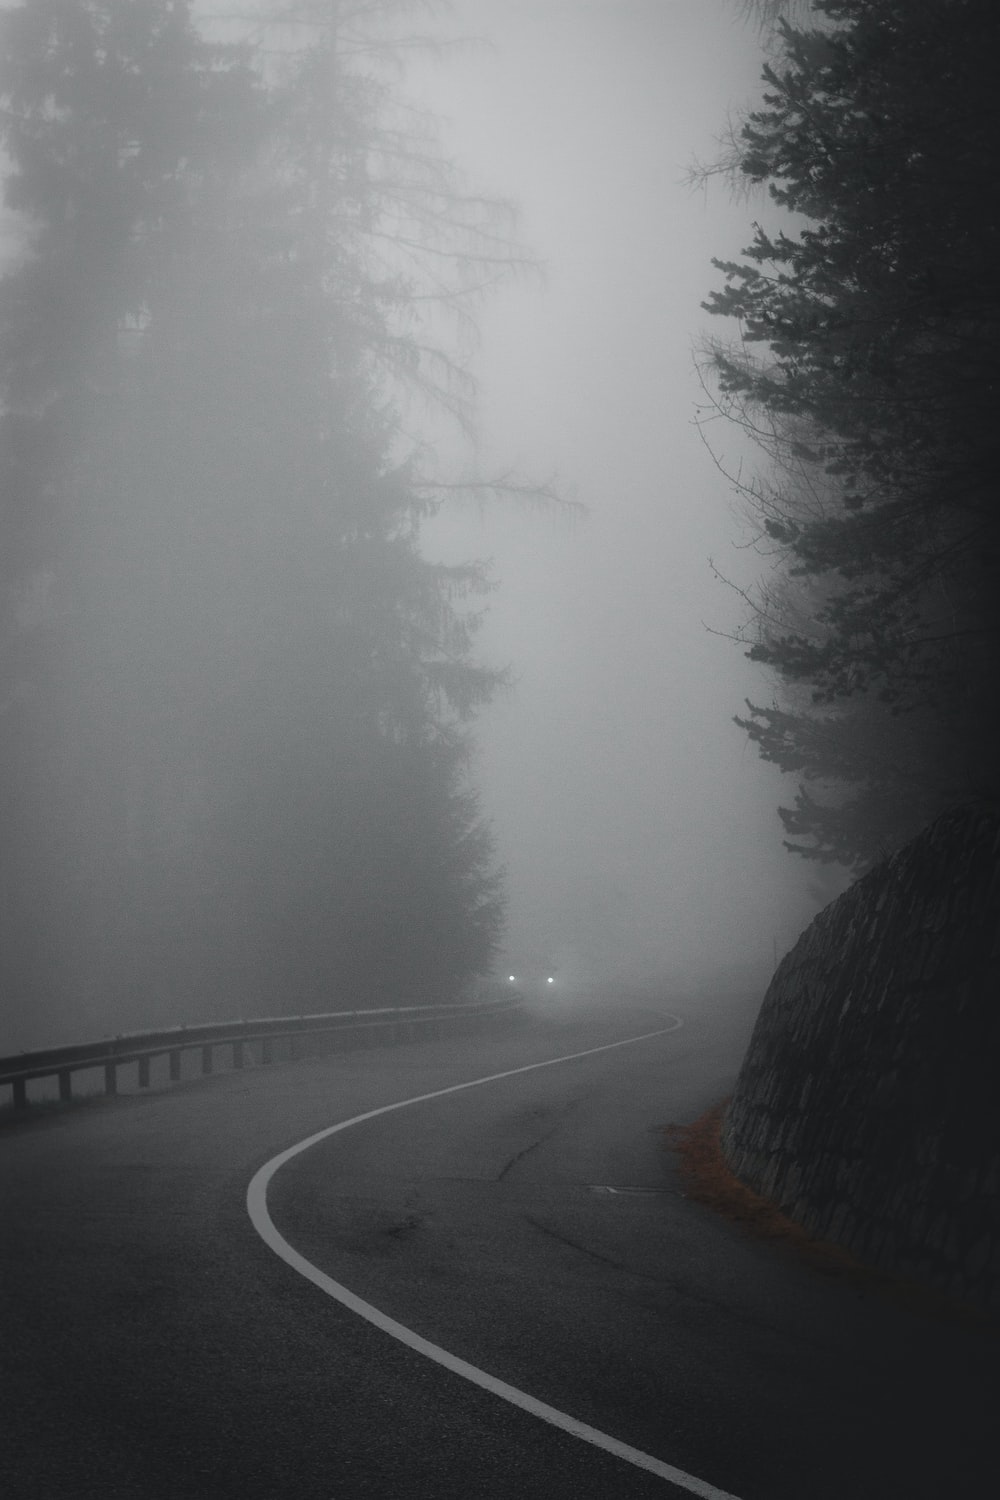 Foggy Road Picture. Download Free Image